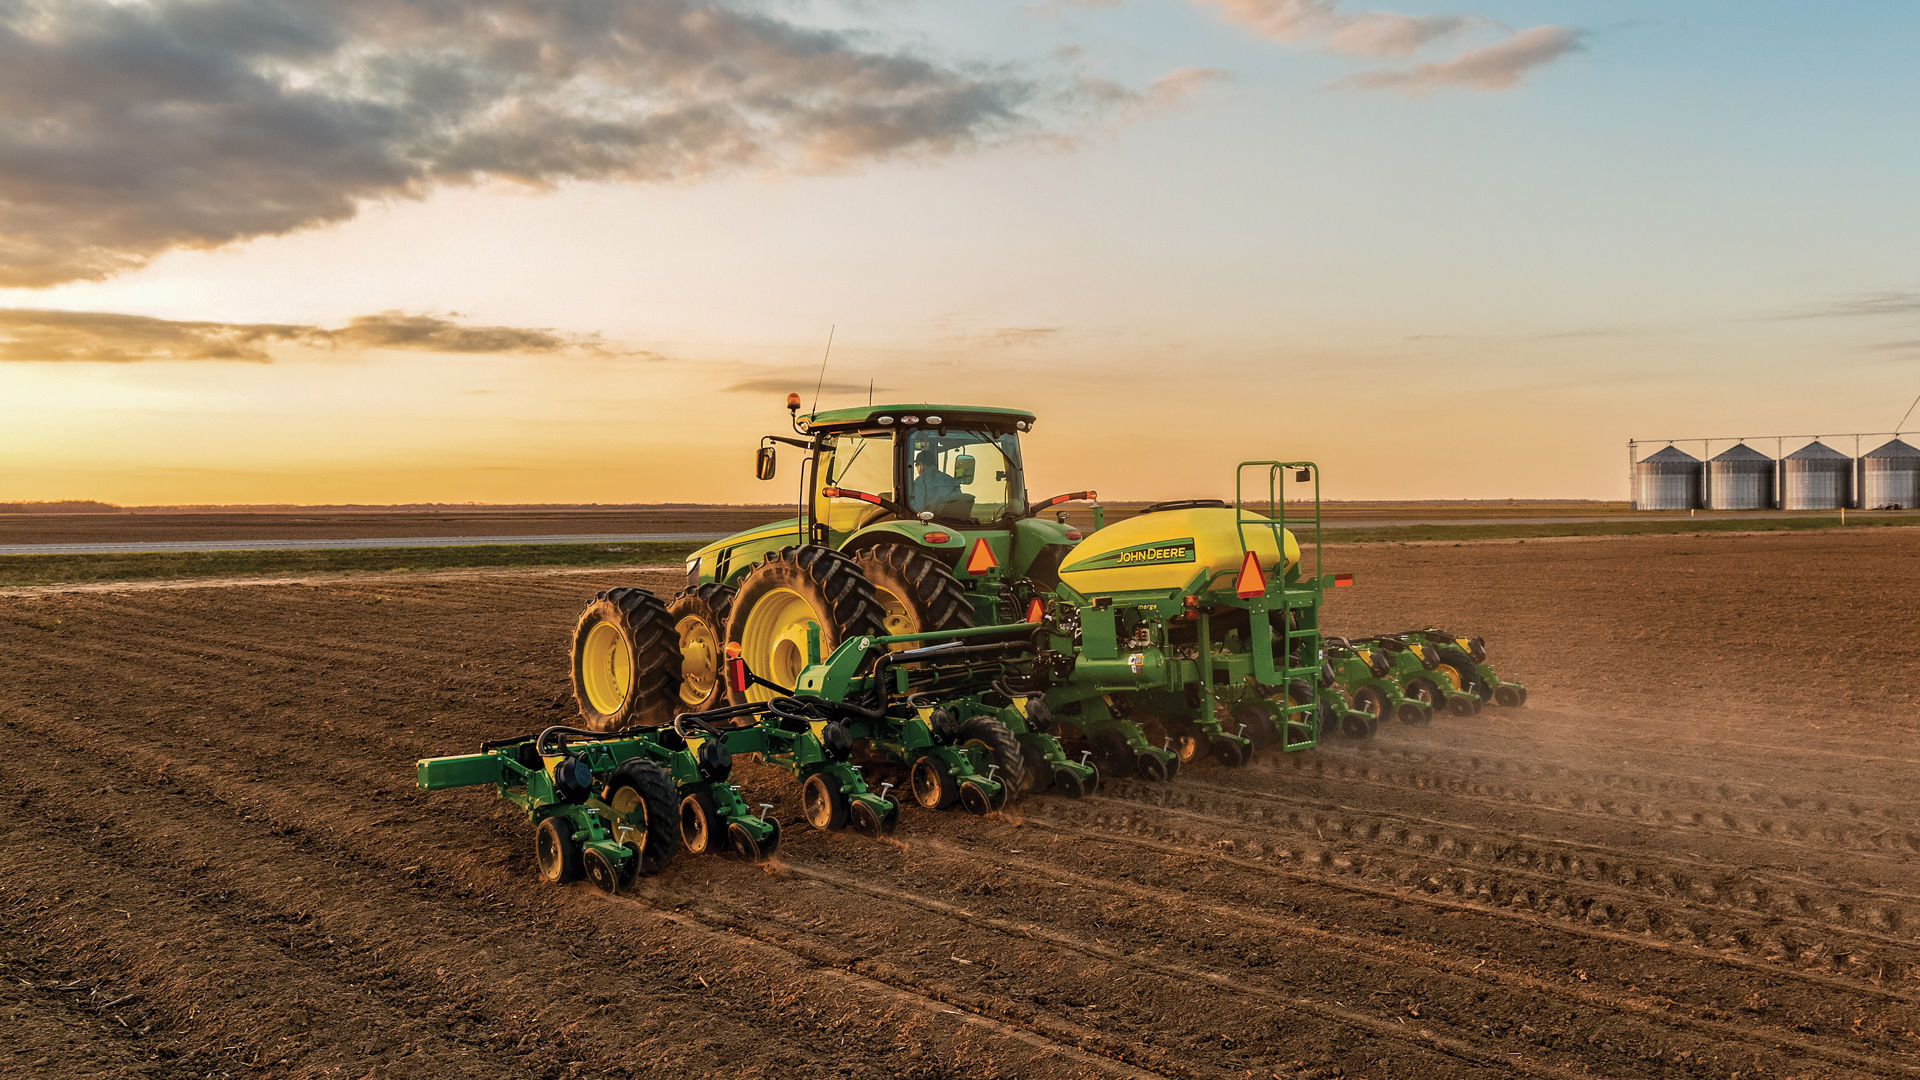 A John Deere tractor and planter in an open field. The blog discusses COVID-19 adaptions happening in Reynolds stores.